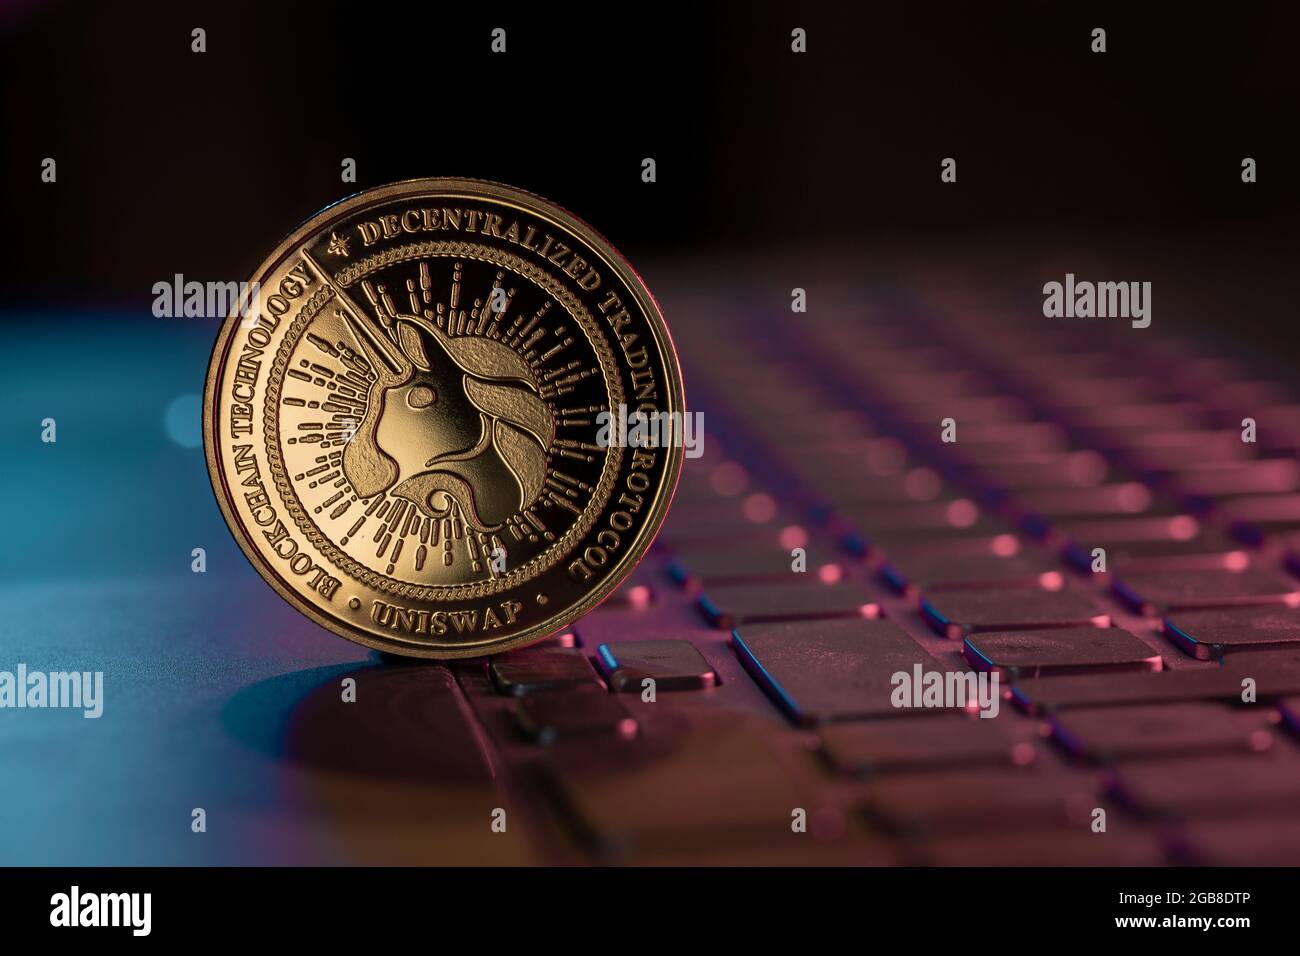 Uniswap UNI cryptocurrency physical coin placed on laptop keyboard and lit with aqua and purple lights Stock Photo